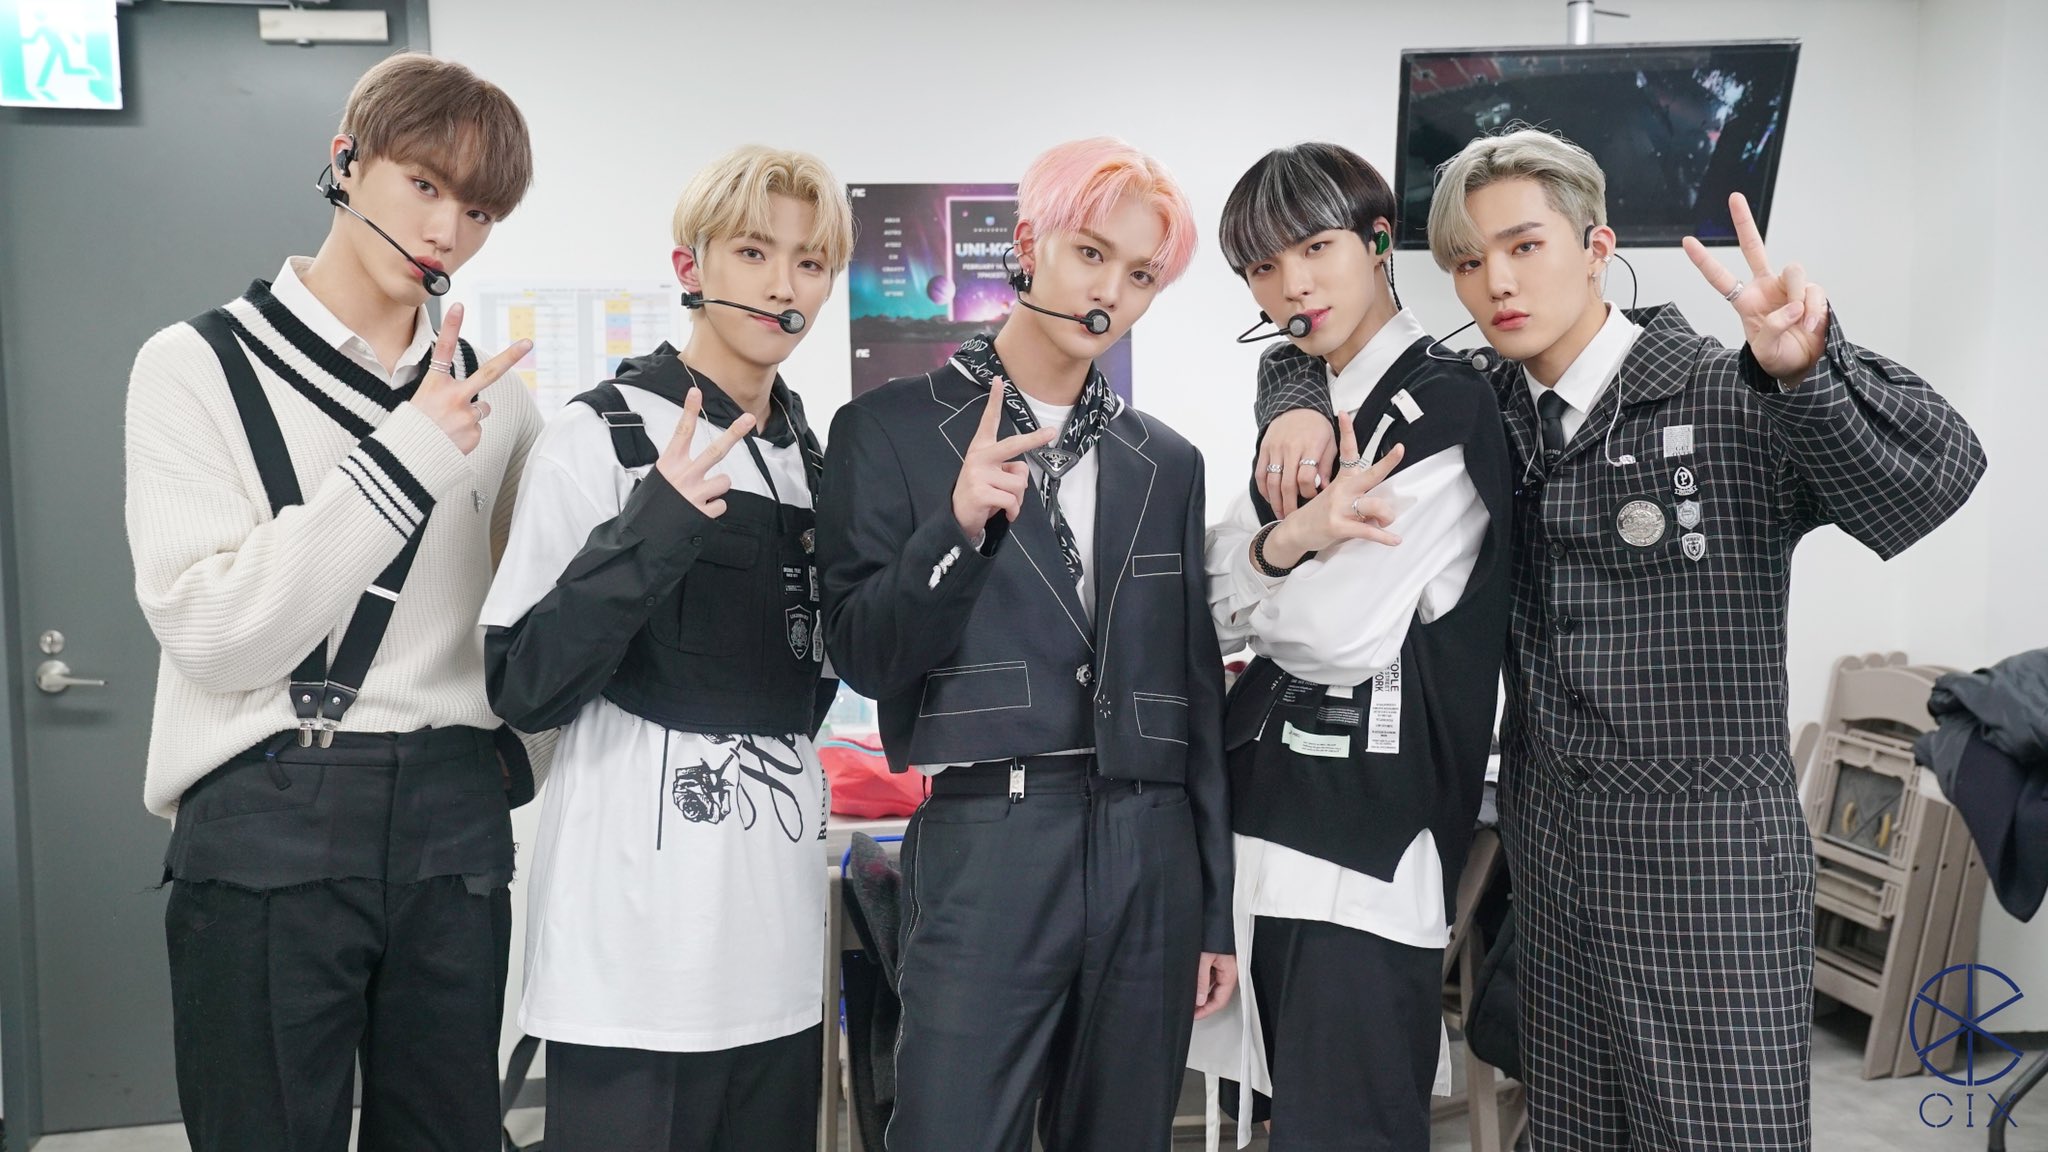 cix-announces-to-host-fan-party-blooming-day-on-april-17-through-universe